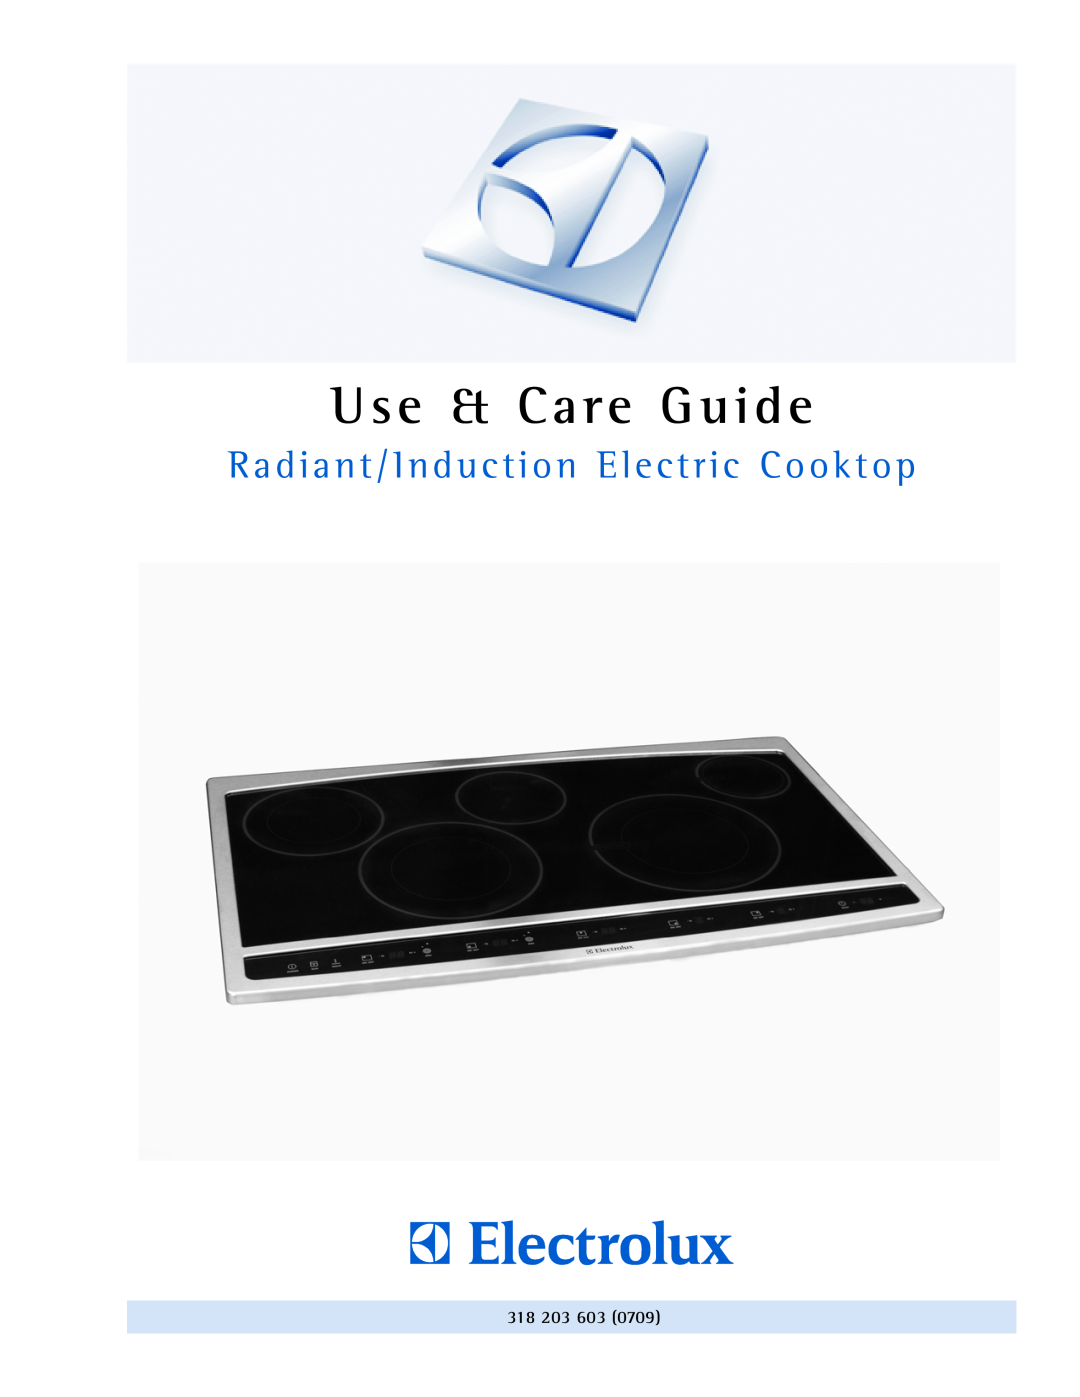 Electrolux 318 203 603 (0709) manual Use & Care Guide, Radiant/Induction Electric Cooktop 